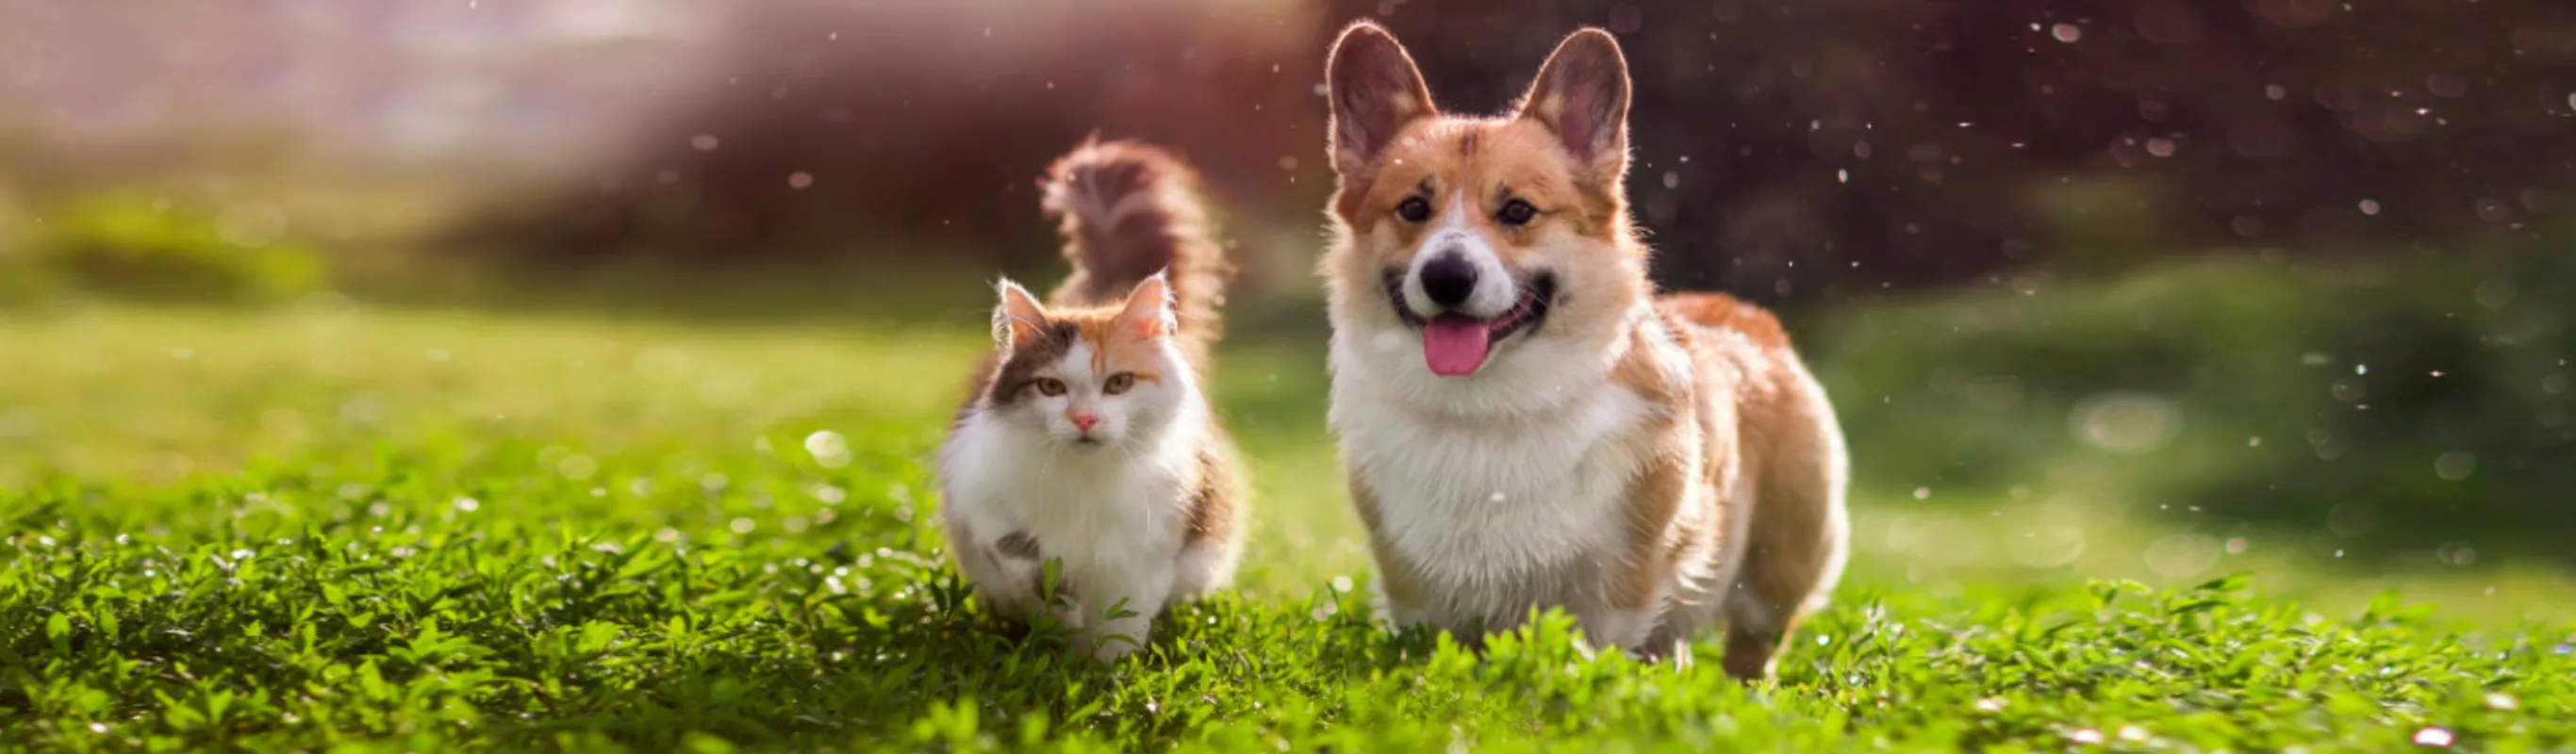 Corgi (Dog) and Cat Standing in a Grassy Field